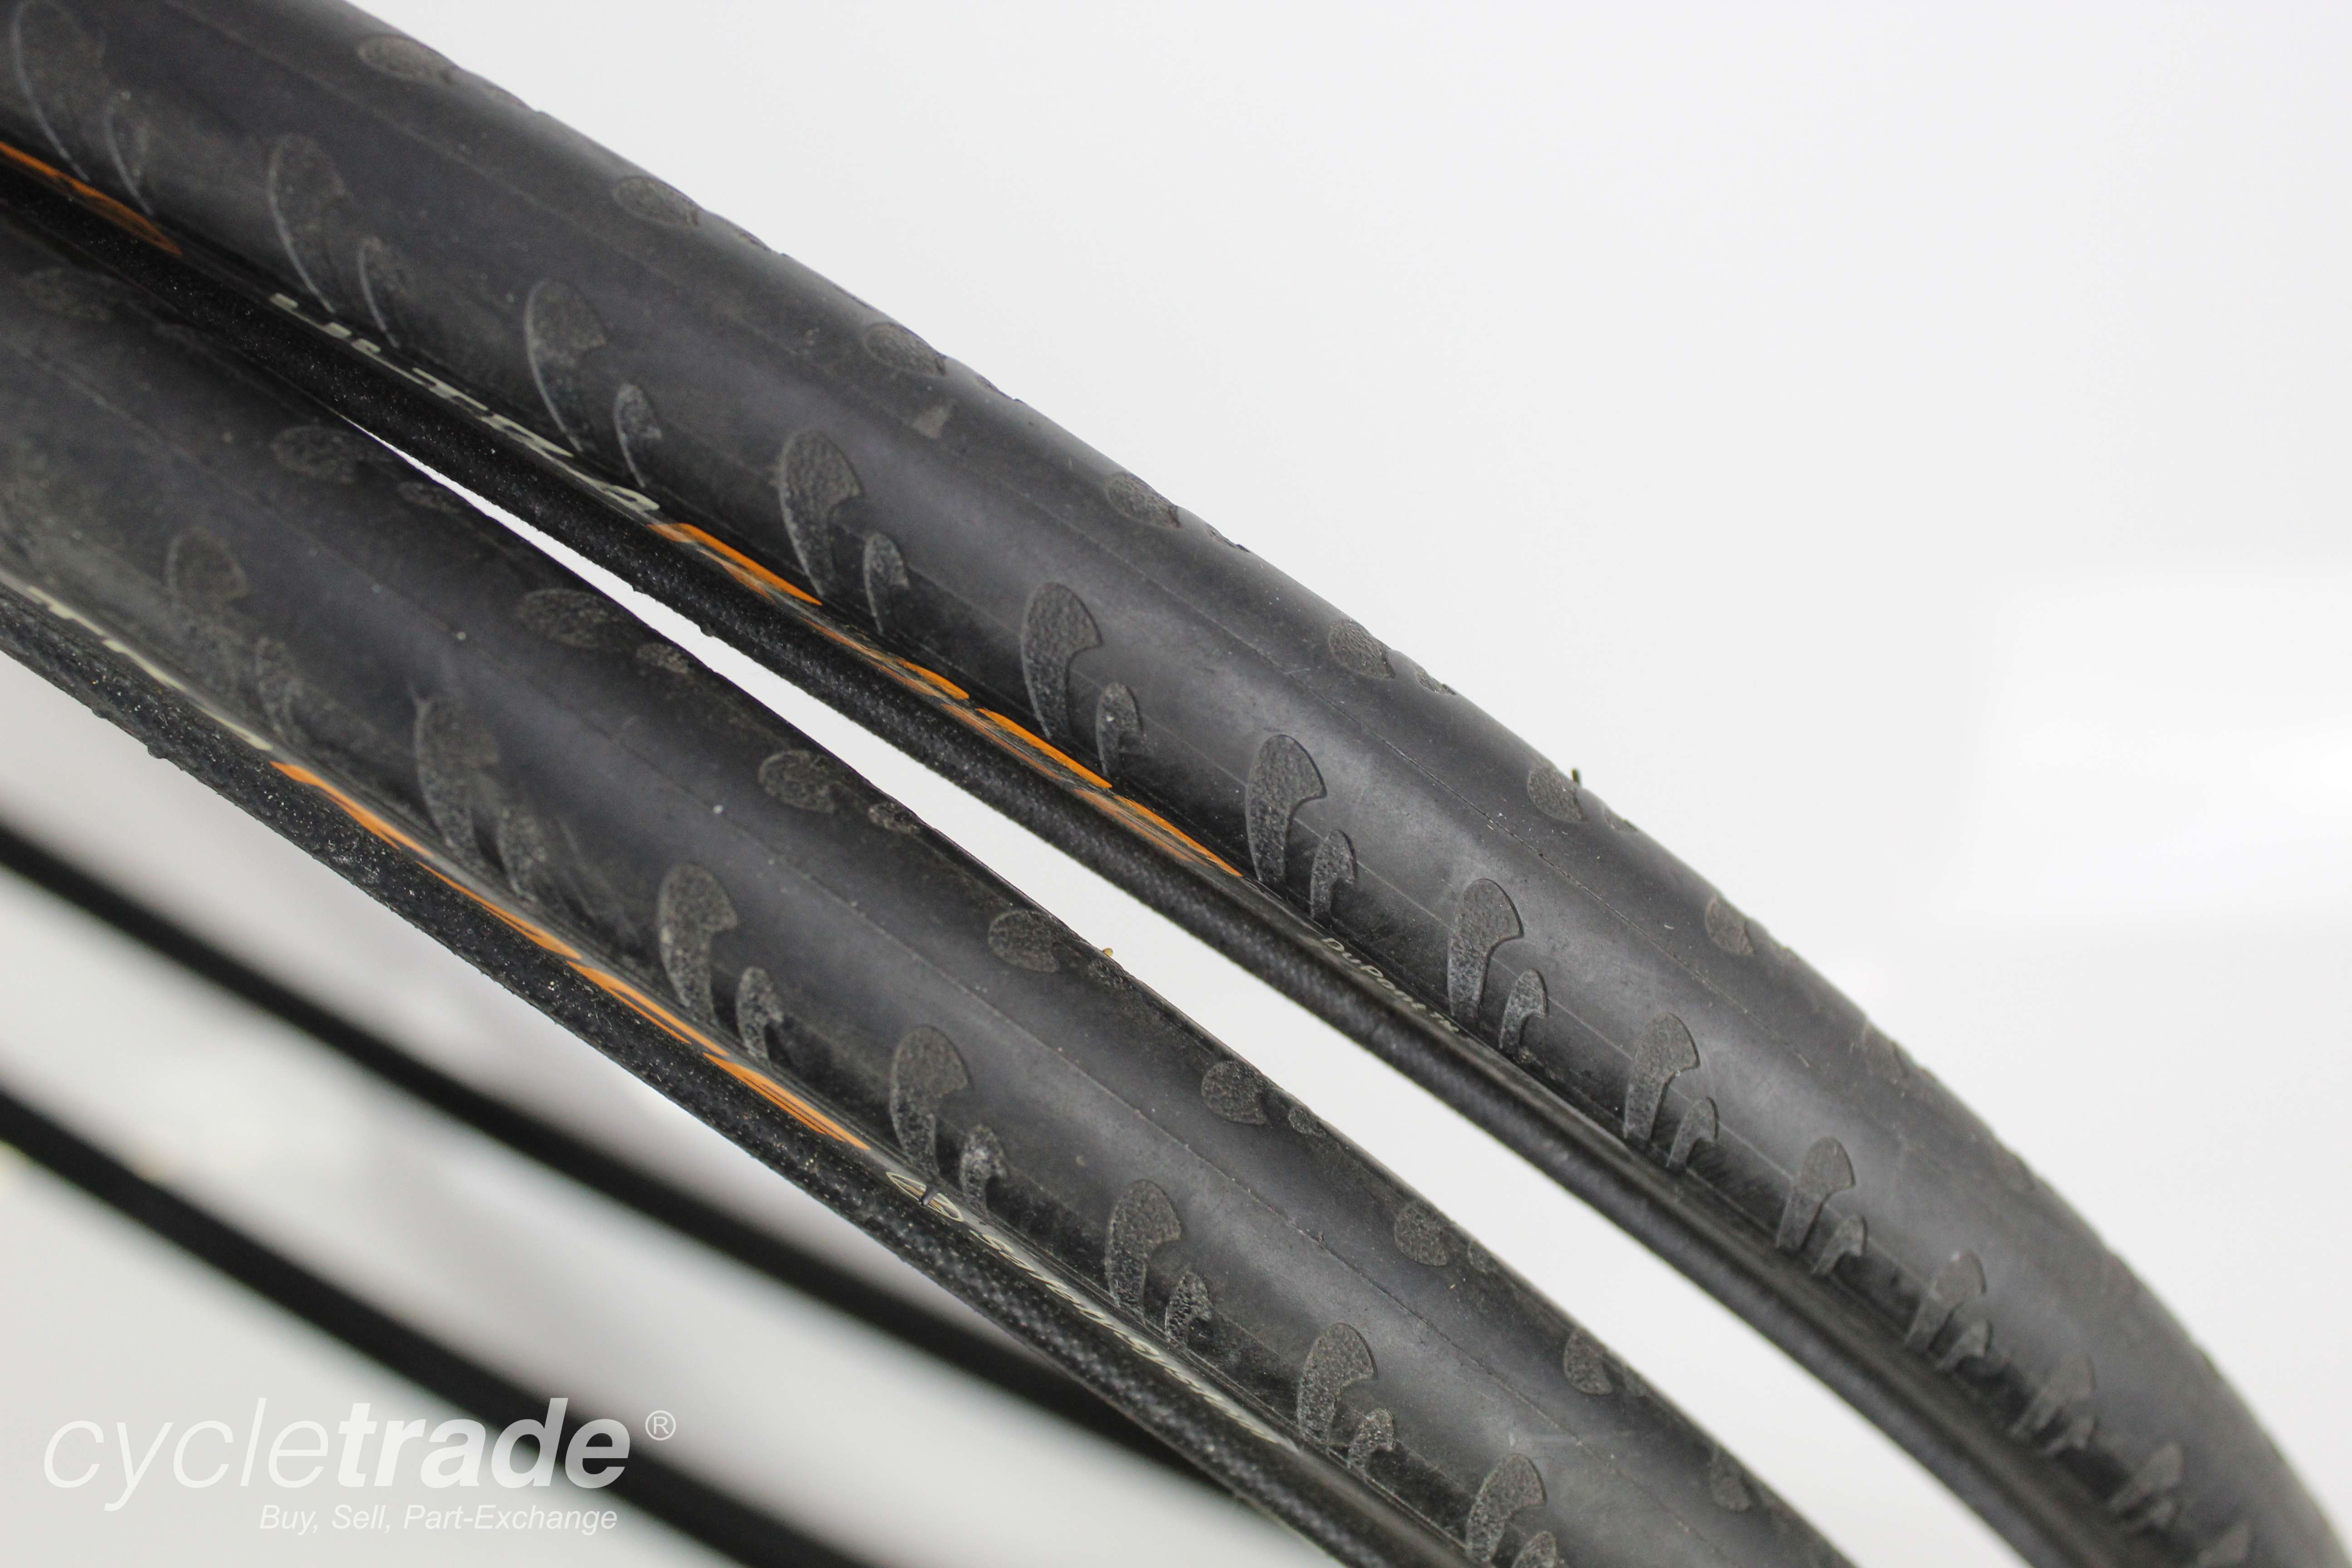 Road Tyres PAIR - Continental Ultra Race 700c x 23mm Clincher - Grade B+